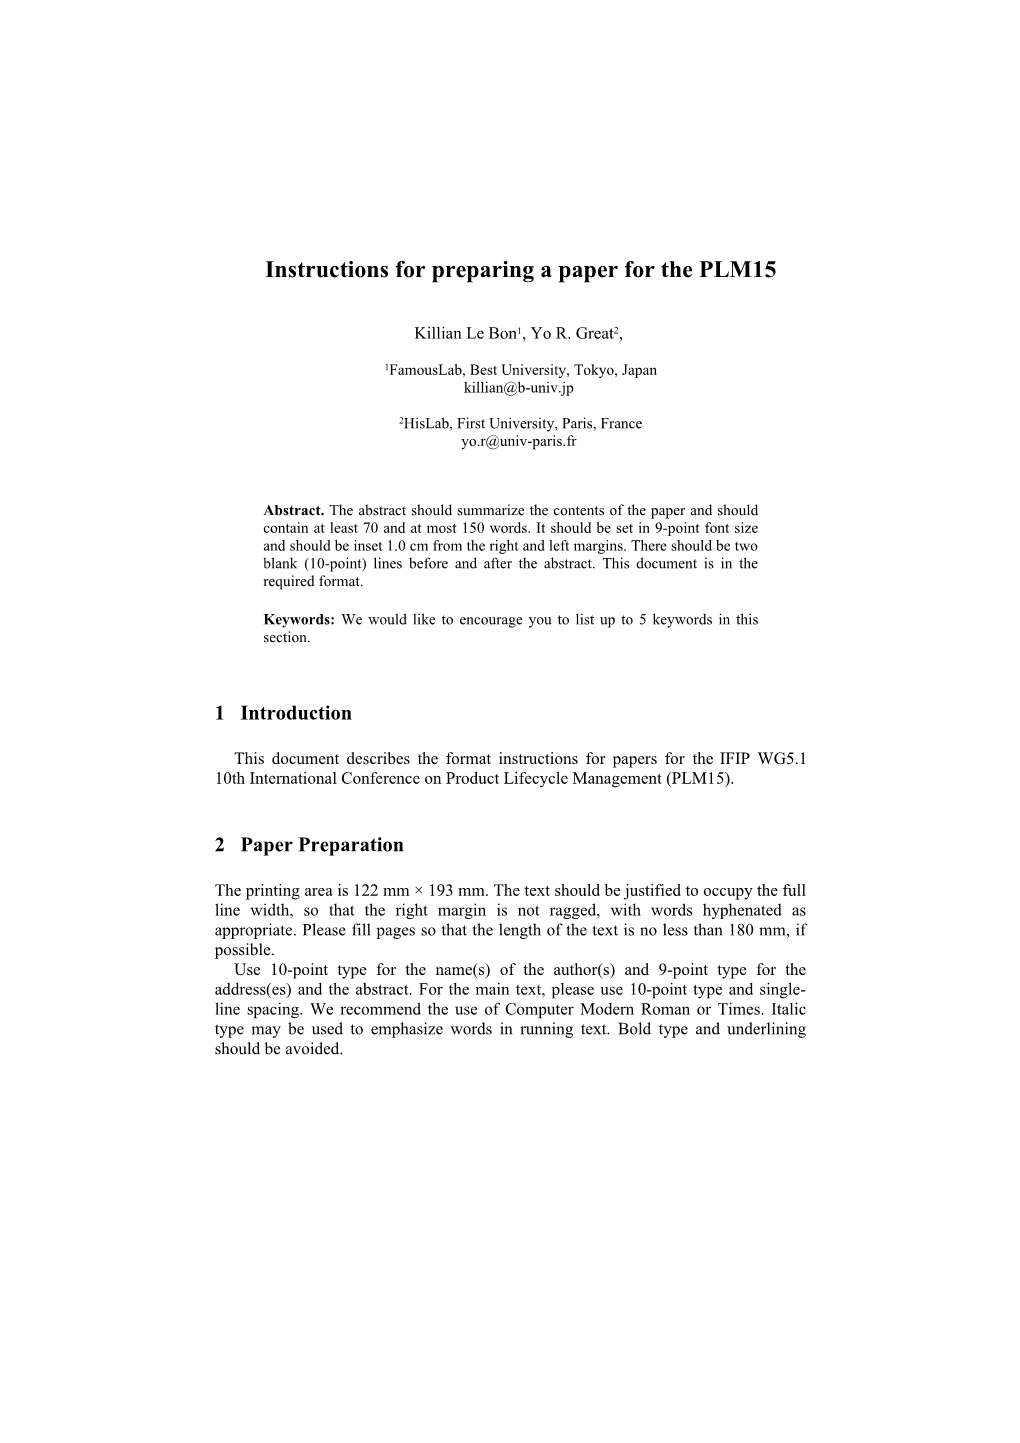 Instructions for Preparing a Paper for the PLM15